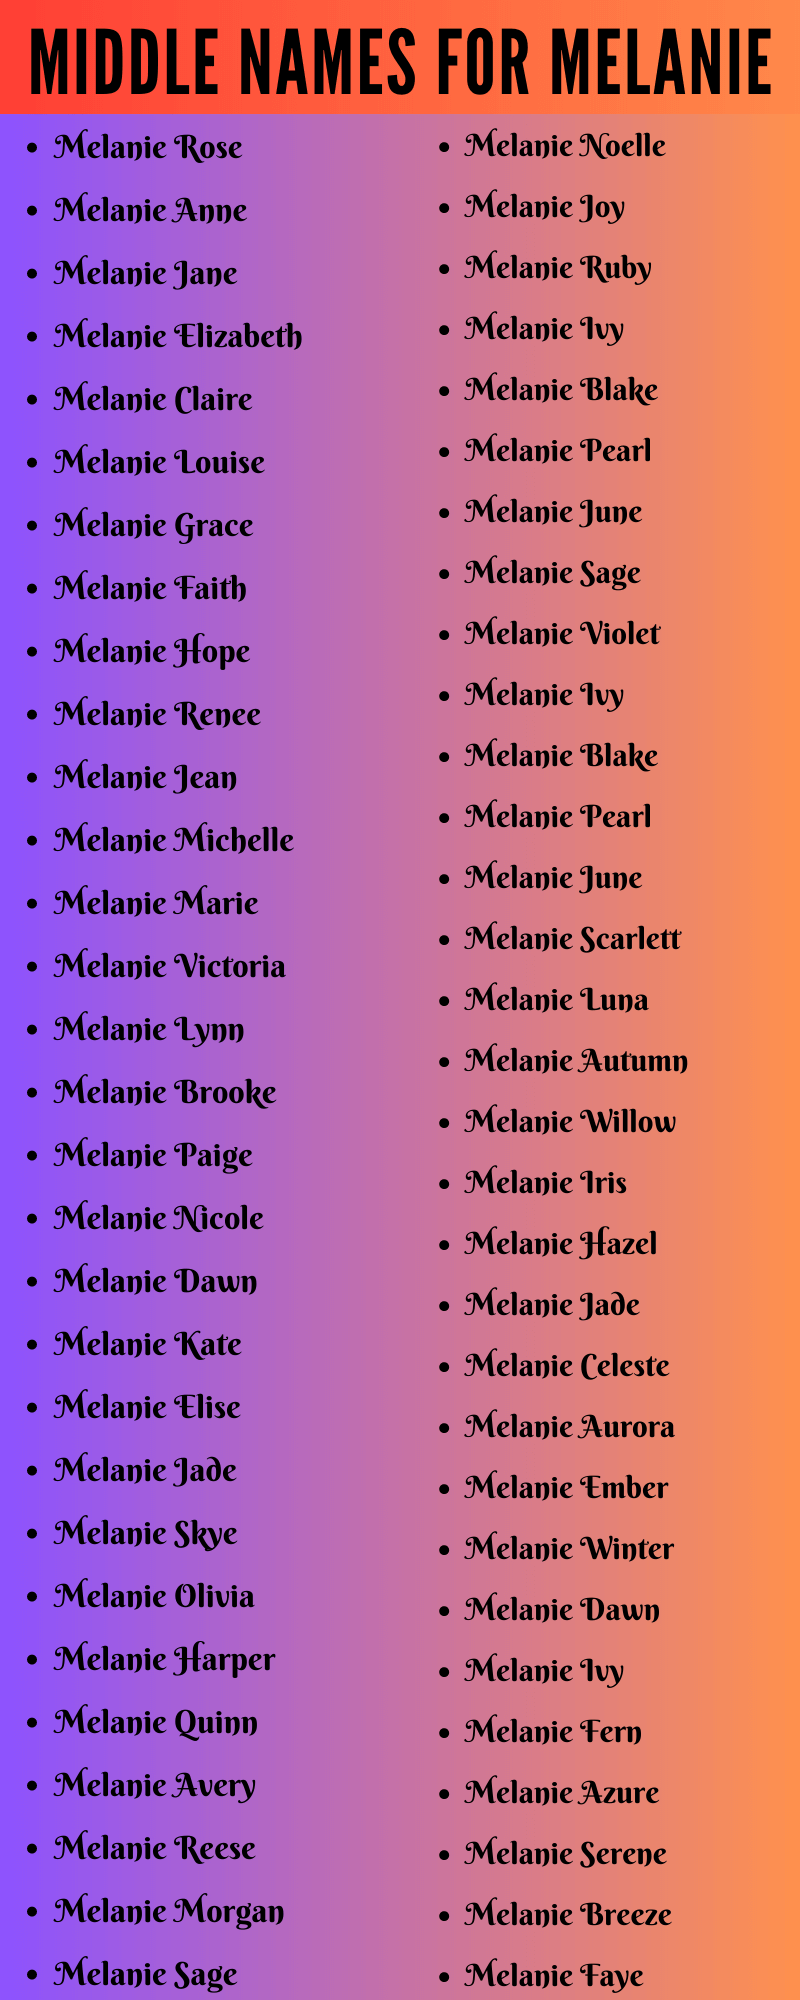 400 Classy Middle Names For Melanie